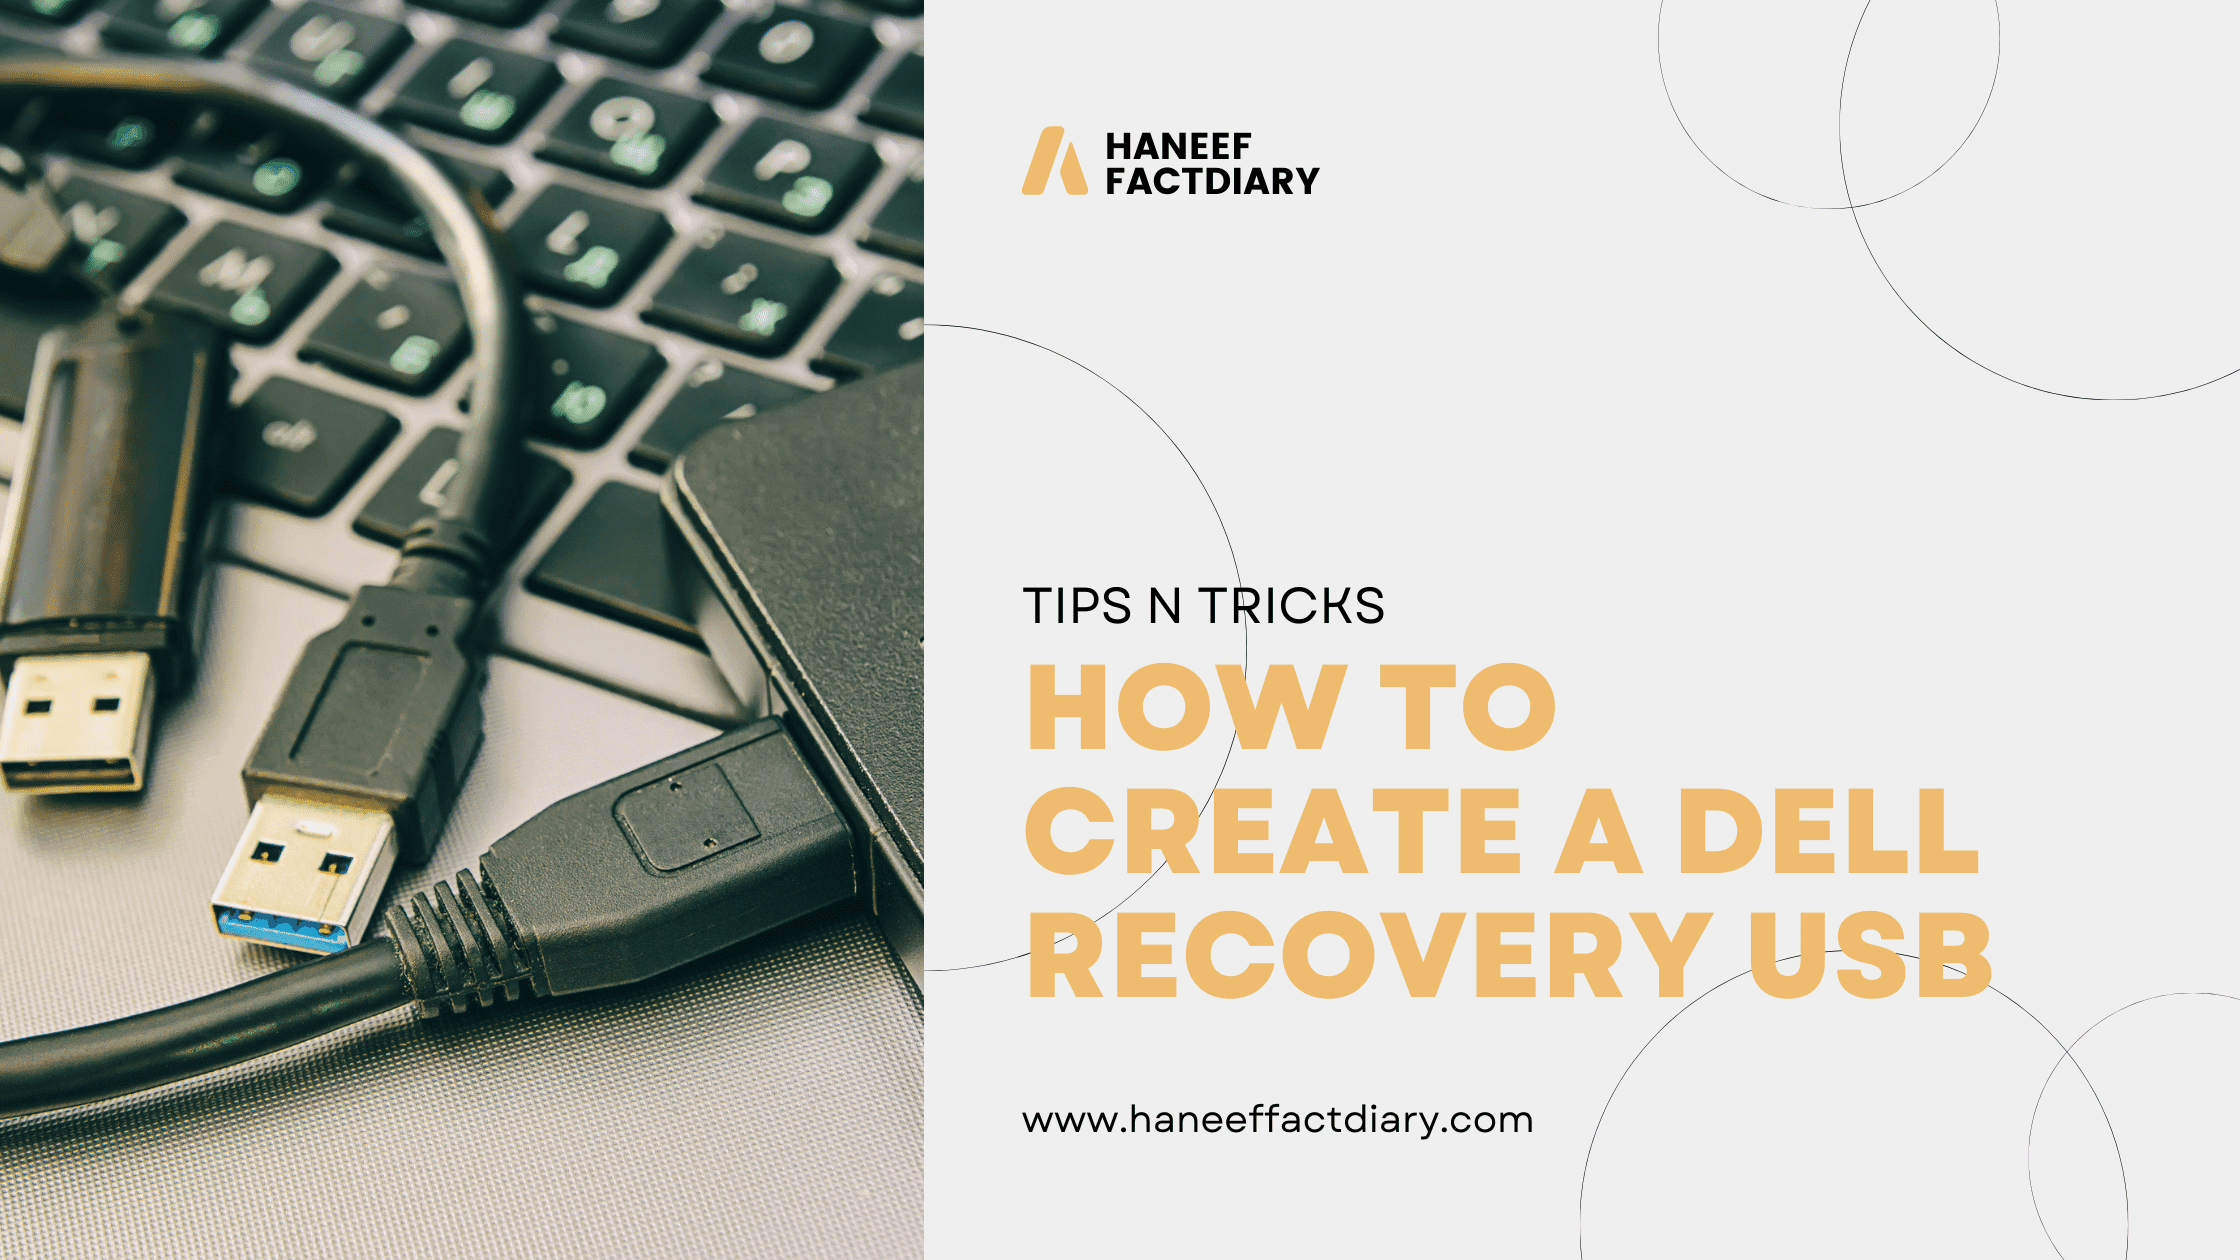 How to create a dell recovery usb